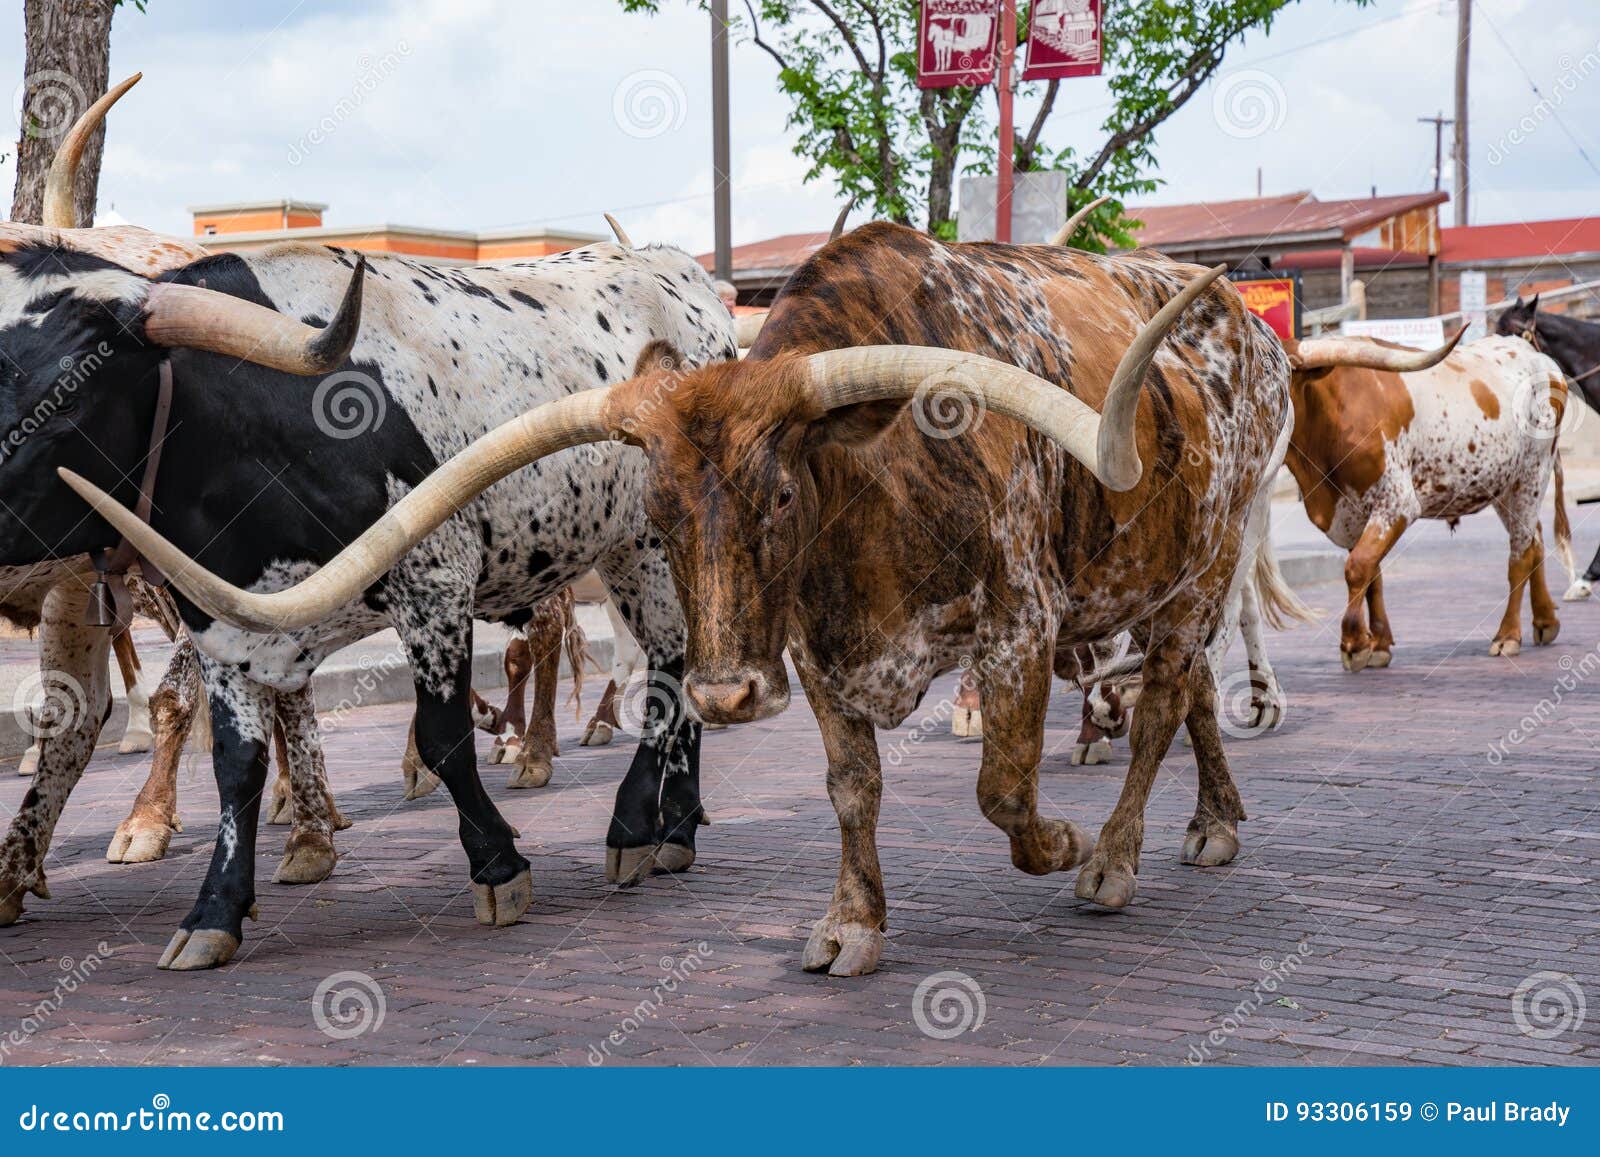 fort worth texas longhorn cattle drive